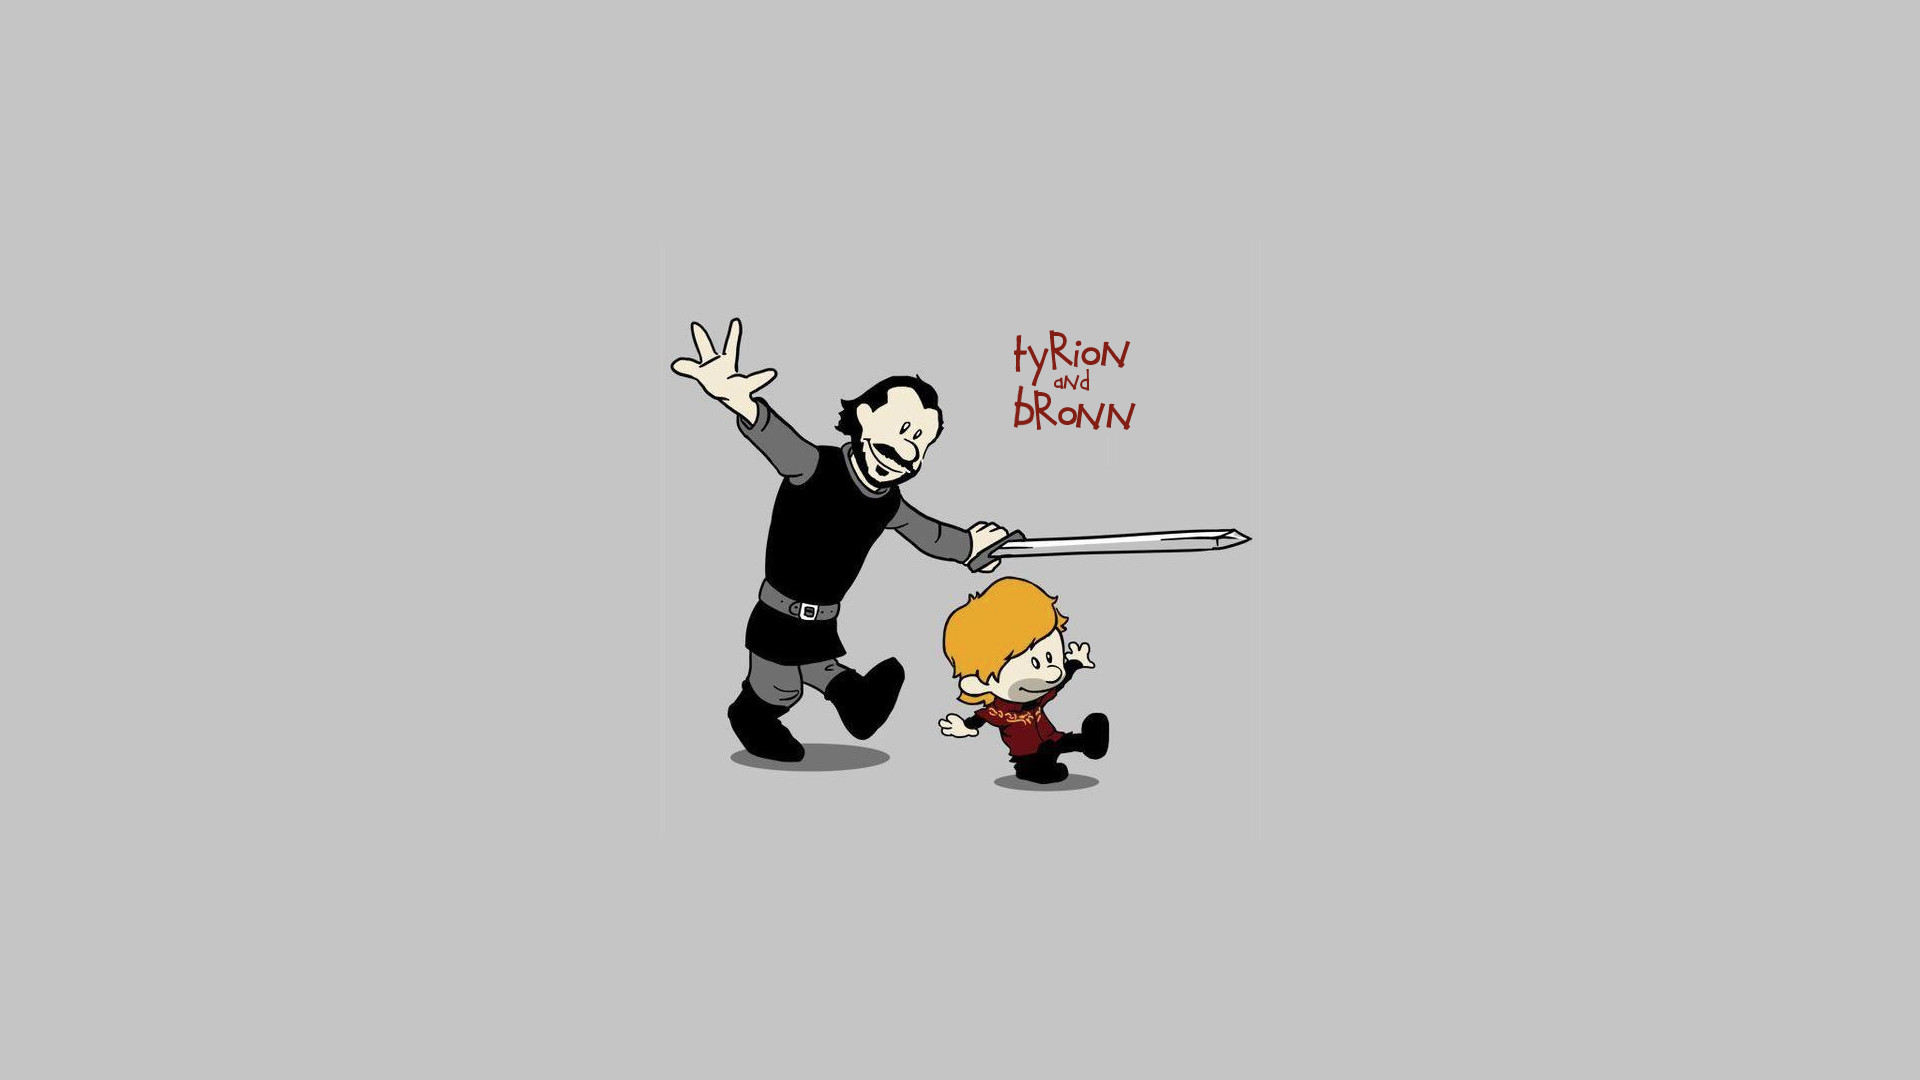 1920x1080 Game of Thrones calvin & hobbes styled []. (not sure where the  original image is from, I just made it a wallpaper and redid the font to  remove ...